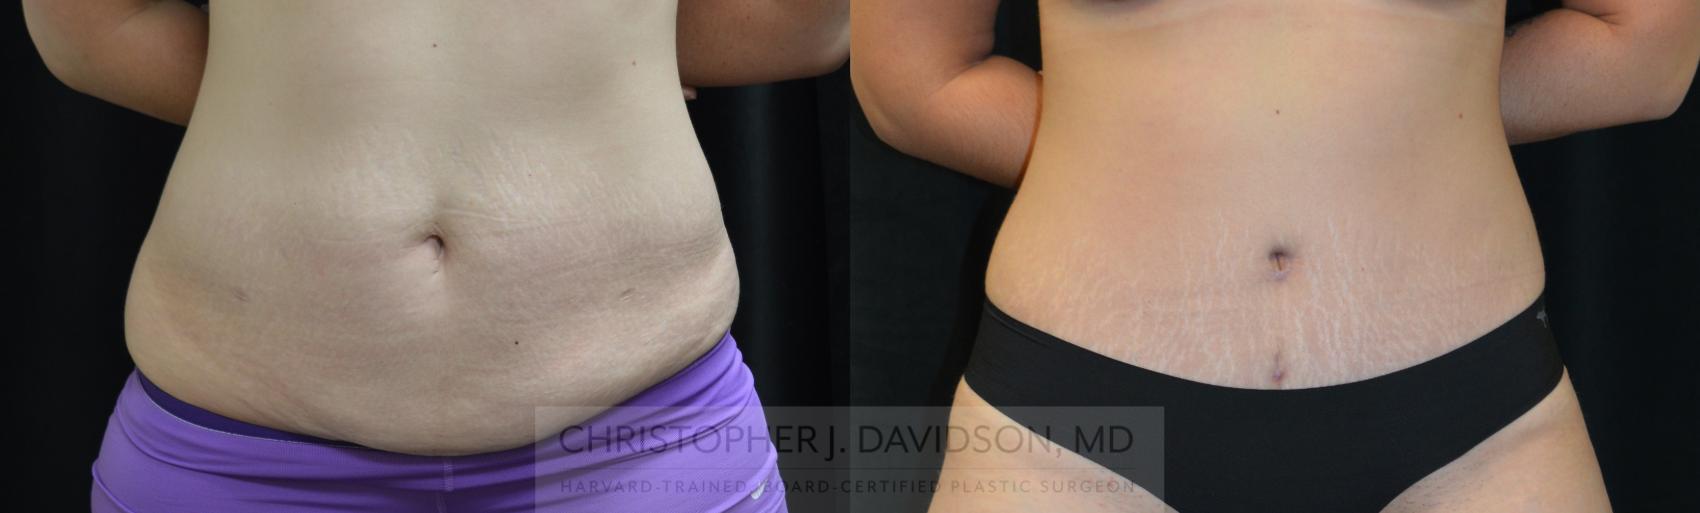 Tummy Tuck (Abdominoplasty) Case 259 Before & After Front | Boston, MA | Christopher J. Davidson, MD